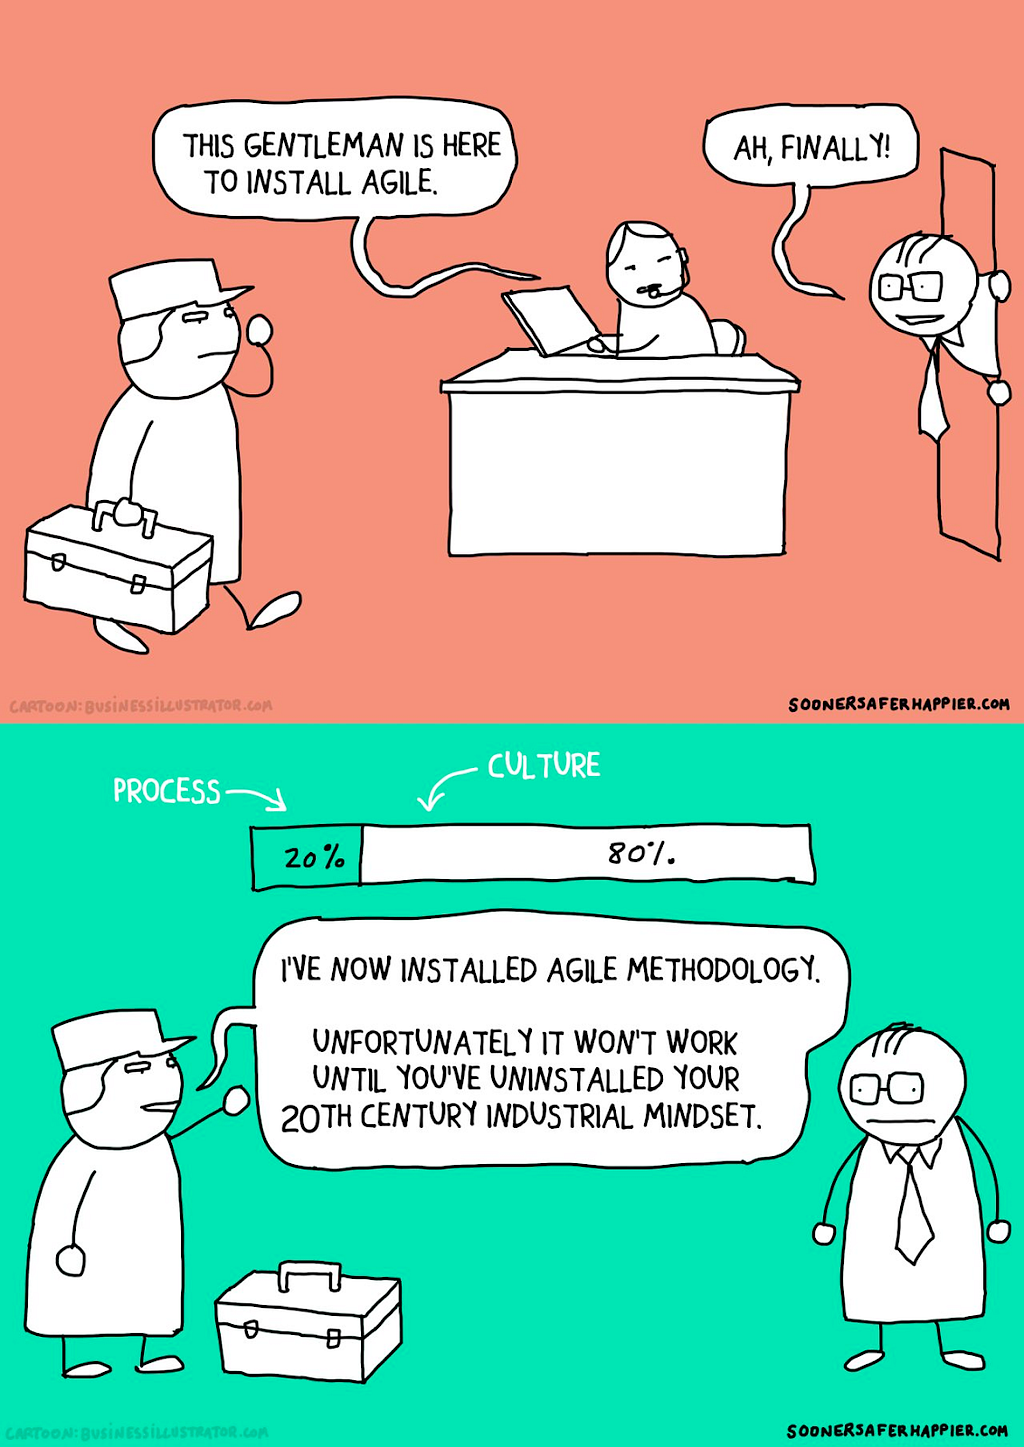 Comics about setting up agile in a company. 3 characters: a receptionist, a company director and a technician. 1st comic Receptionist “this gentleman is here to install agile” director “Ah finally”. 2nd comic: A progress bar at the top shows in green “process 20%” & in white “culture 80%”. The technician says: “I’ve now installed agile methodology, unfortunately it won’t work until you’ve uninstalled your 20th century industrial mindset”. Credit: Business Illustrator.com & Sooner Safer Happier